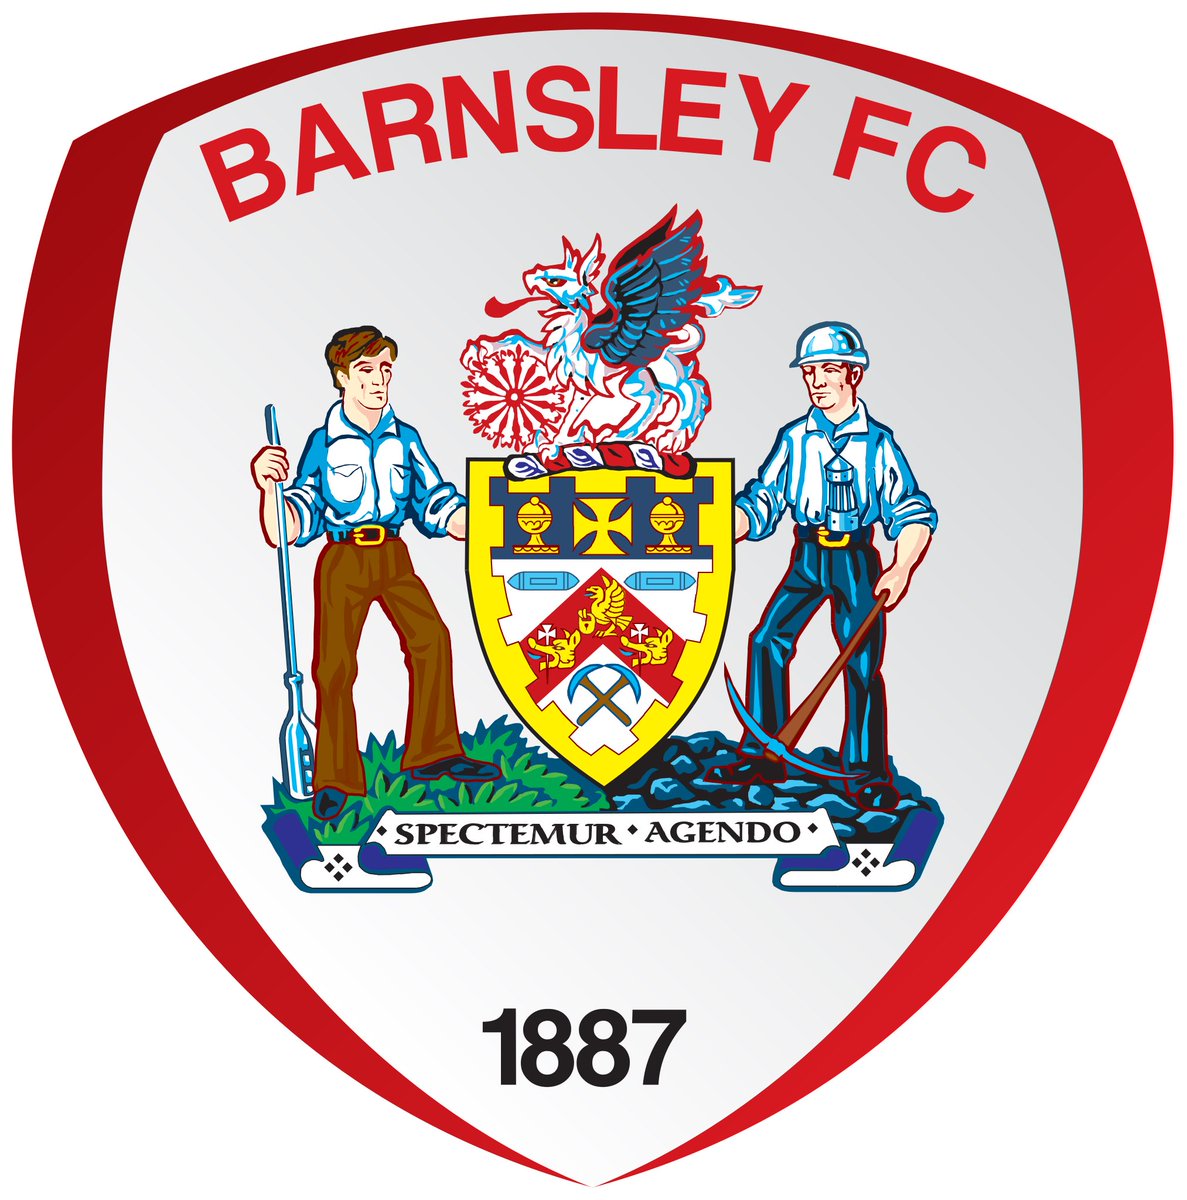 I'm not into football like I was as a young lad with piles of shale on the slag heaps for goalposts but came across #barnsleyfc 's badge which I do find of interest! #Barnsley #mininghistory